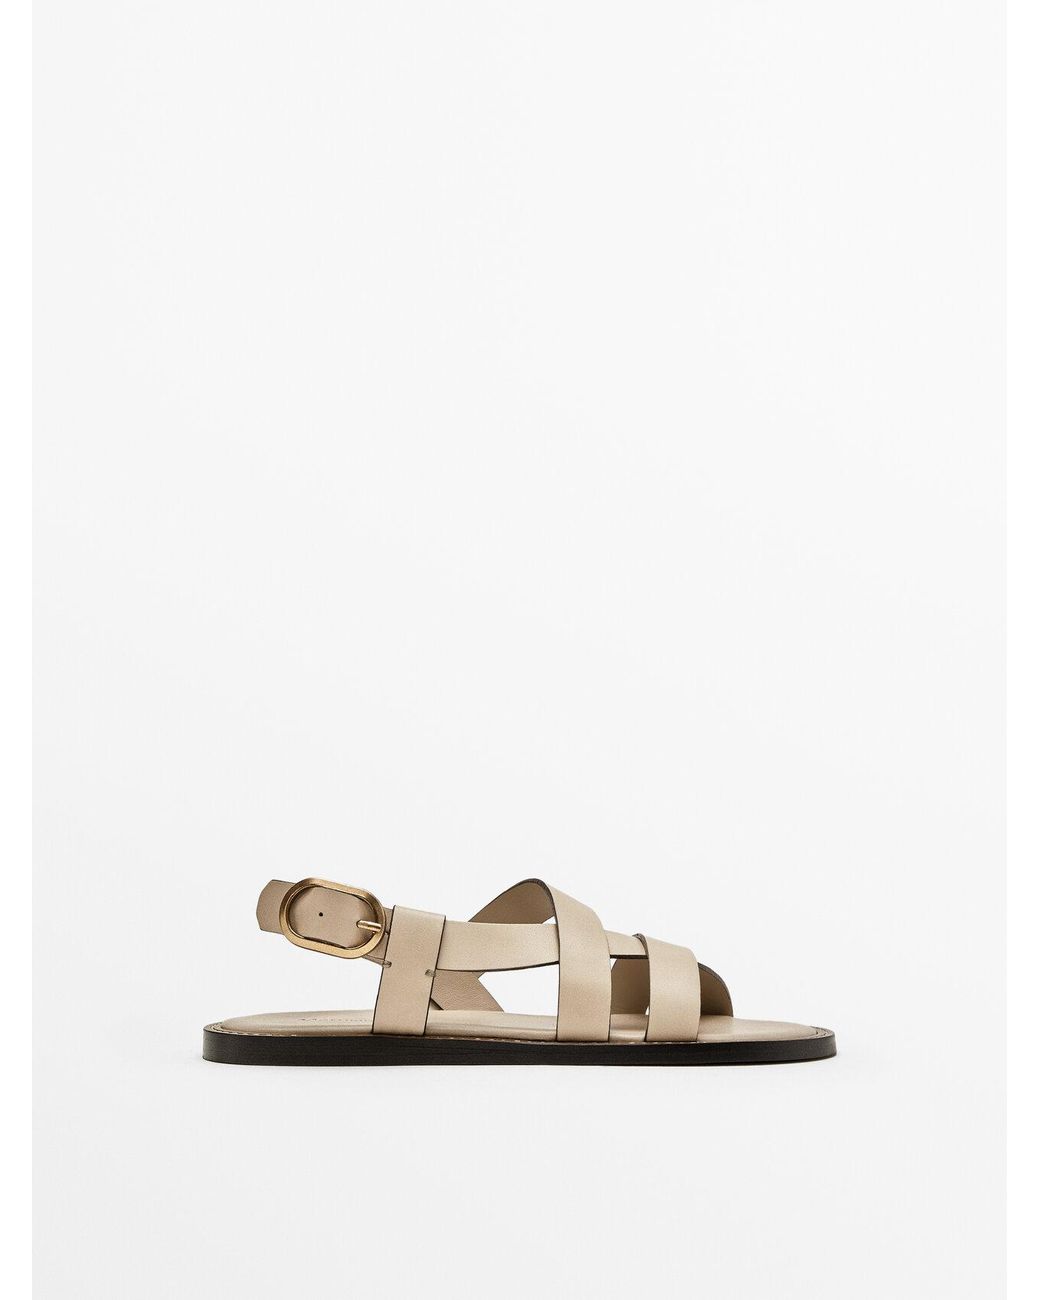 MASSIMO DUTTI Flat Leather Strappy Sandals in Cream (Natural) | Lyst